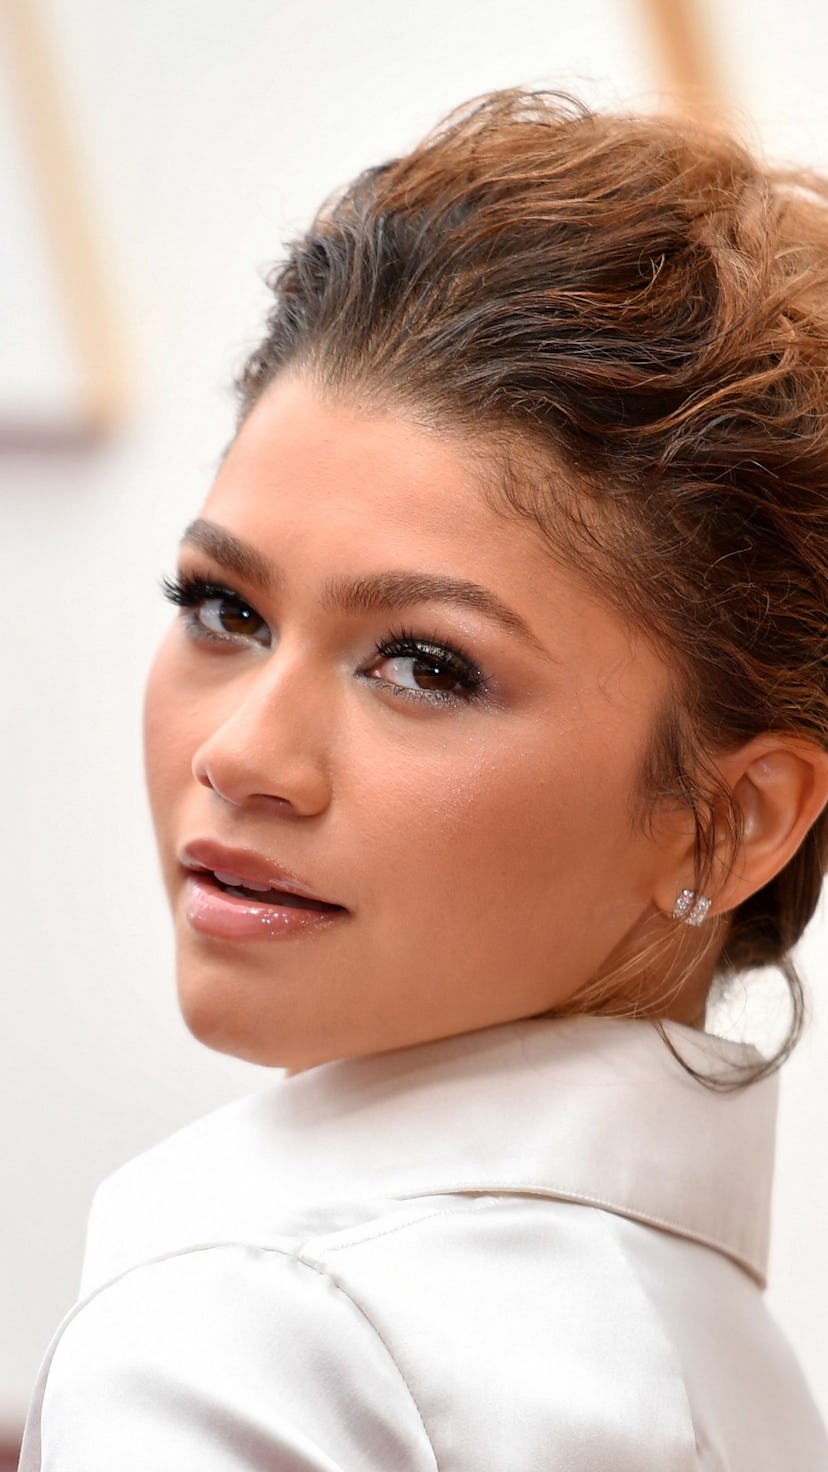 Zendaya texting at the 2022 Oscars became an instant meme on Twitter.